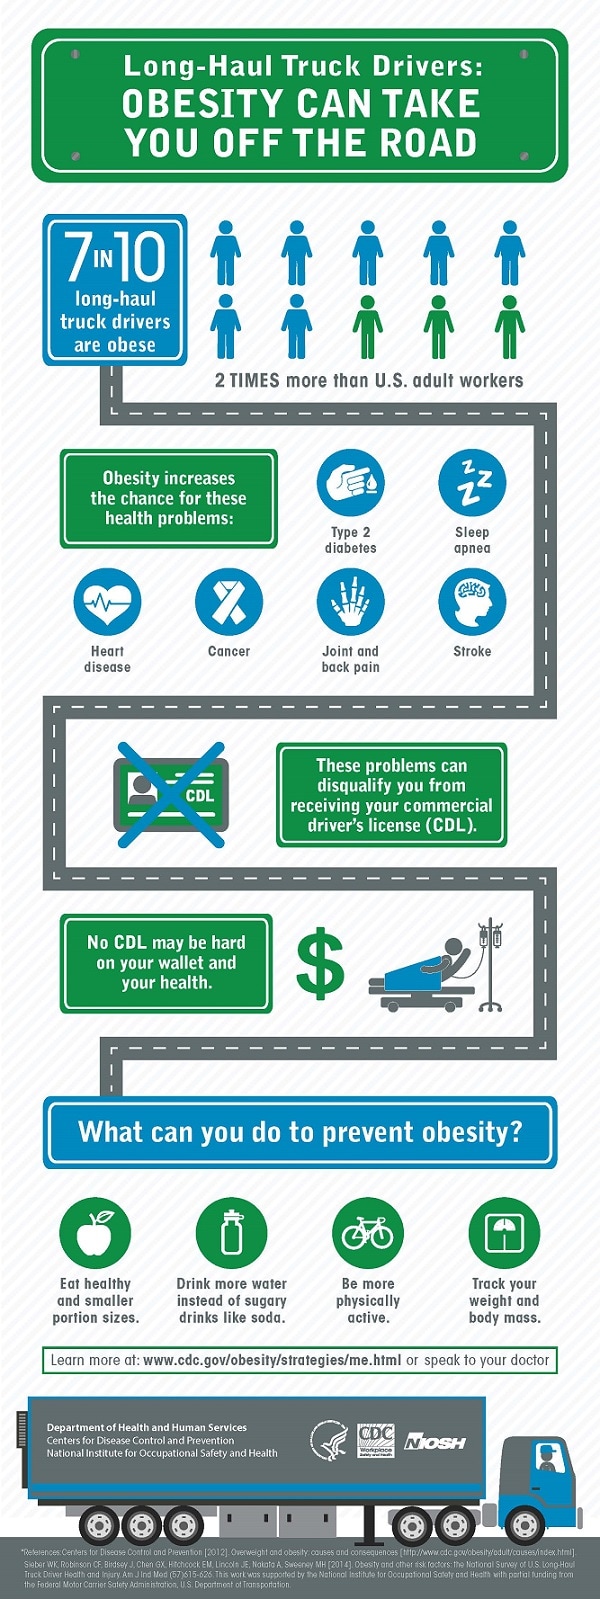 Long Haul Truck Driver Infographic - see text equivalent page for details